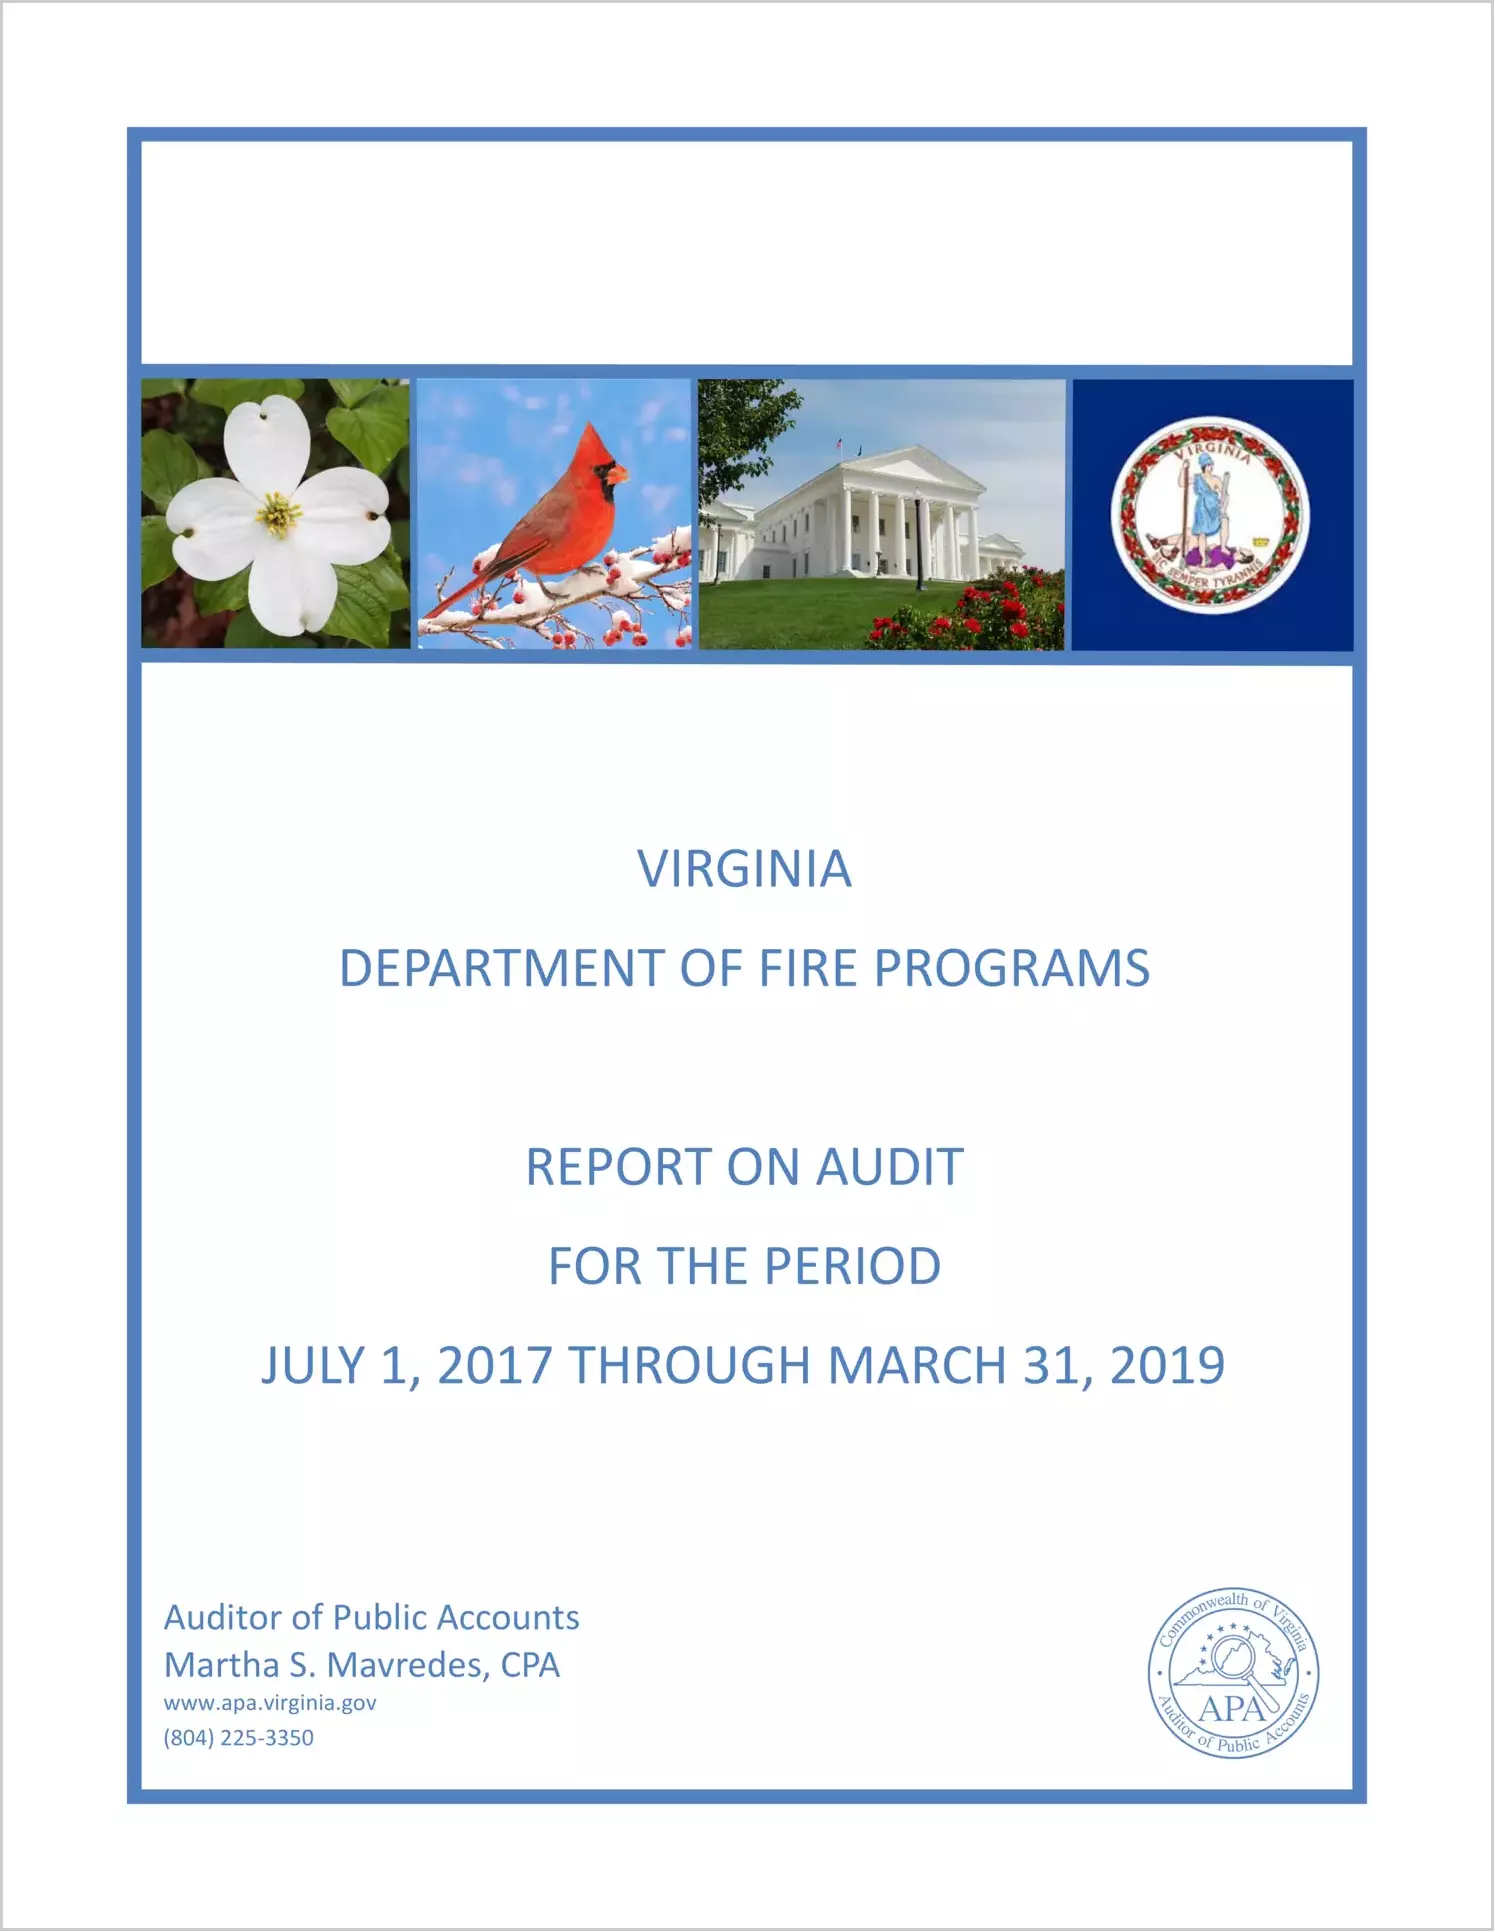 Virginia Department of Fire Programs for the period July 1, 2017 through March 31, 2019